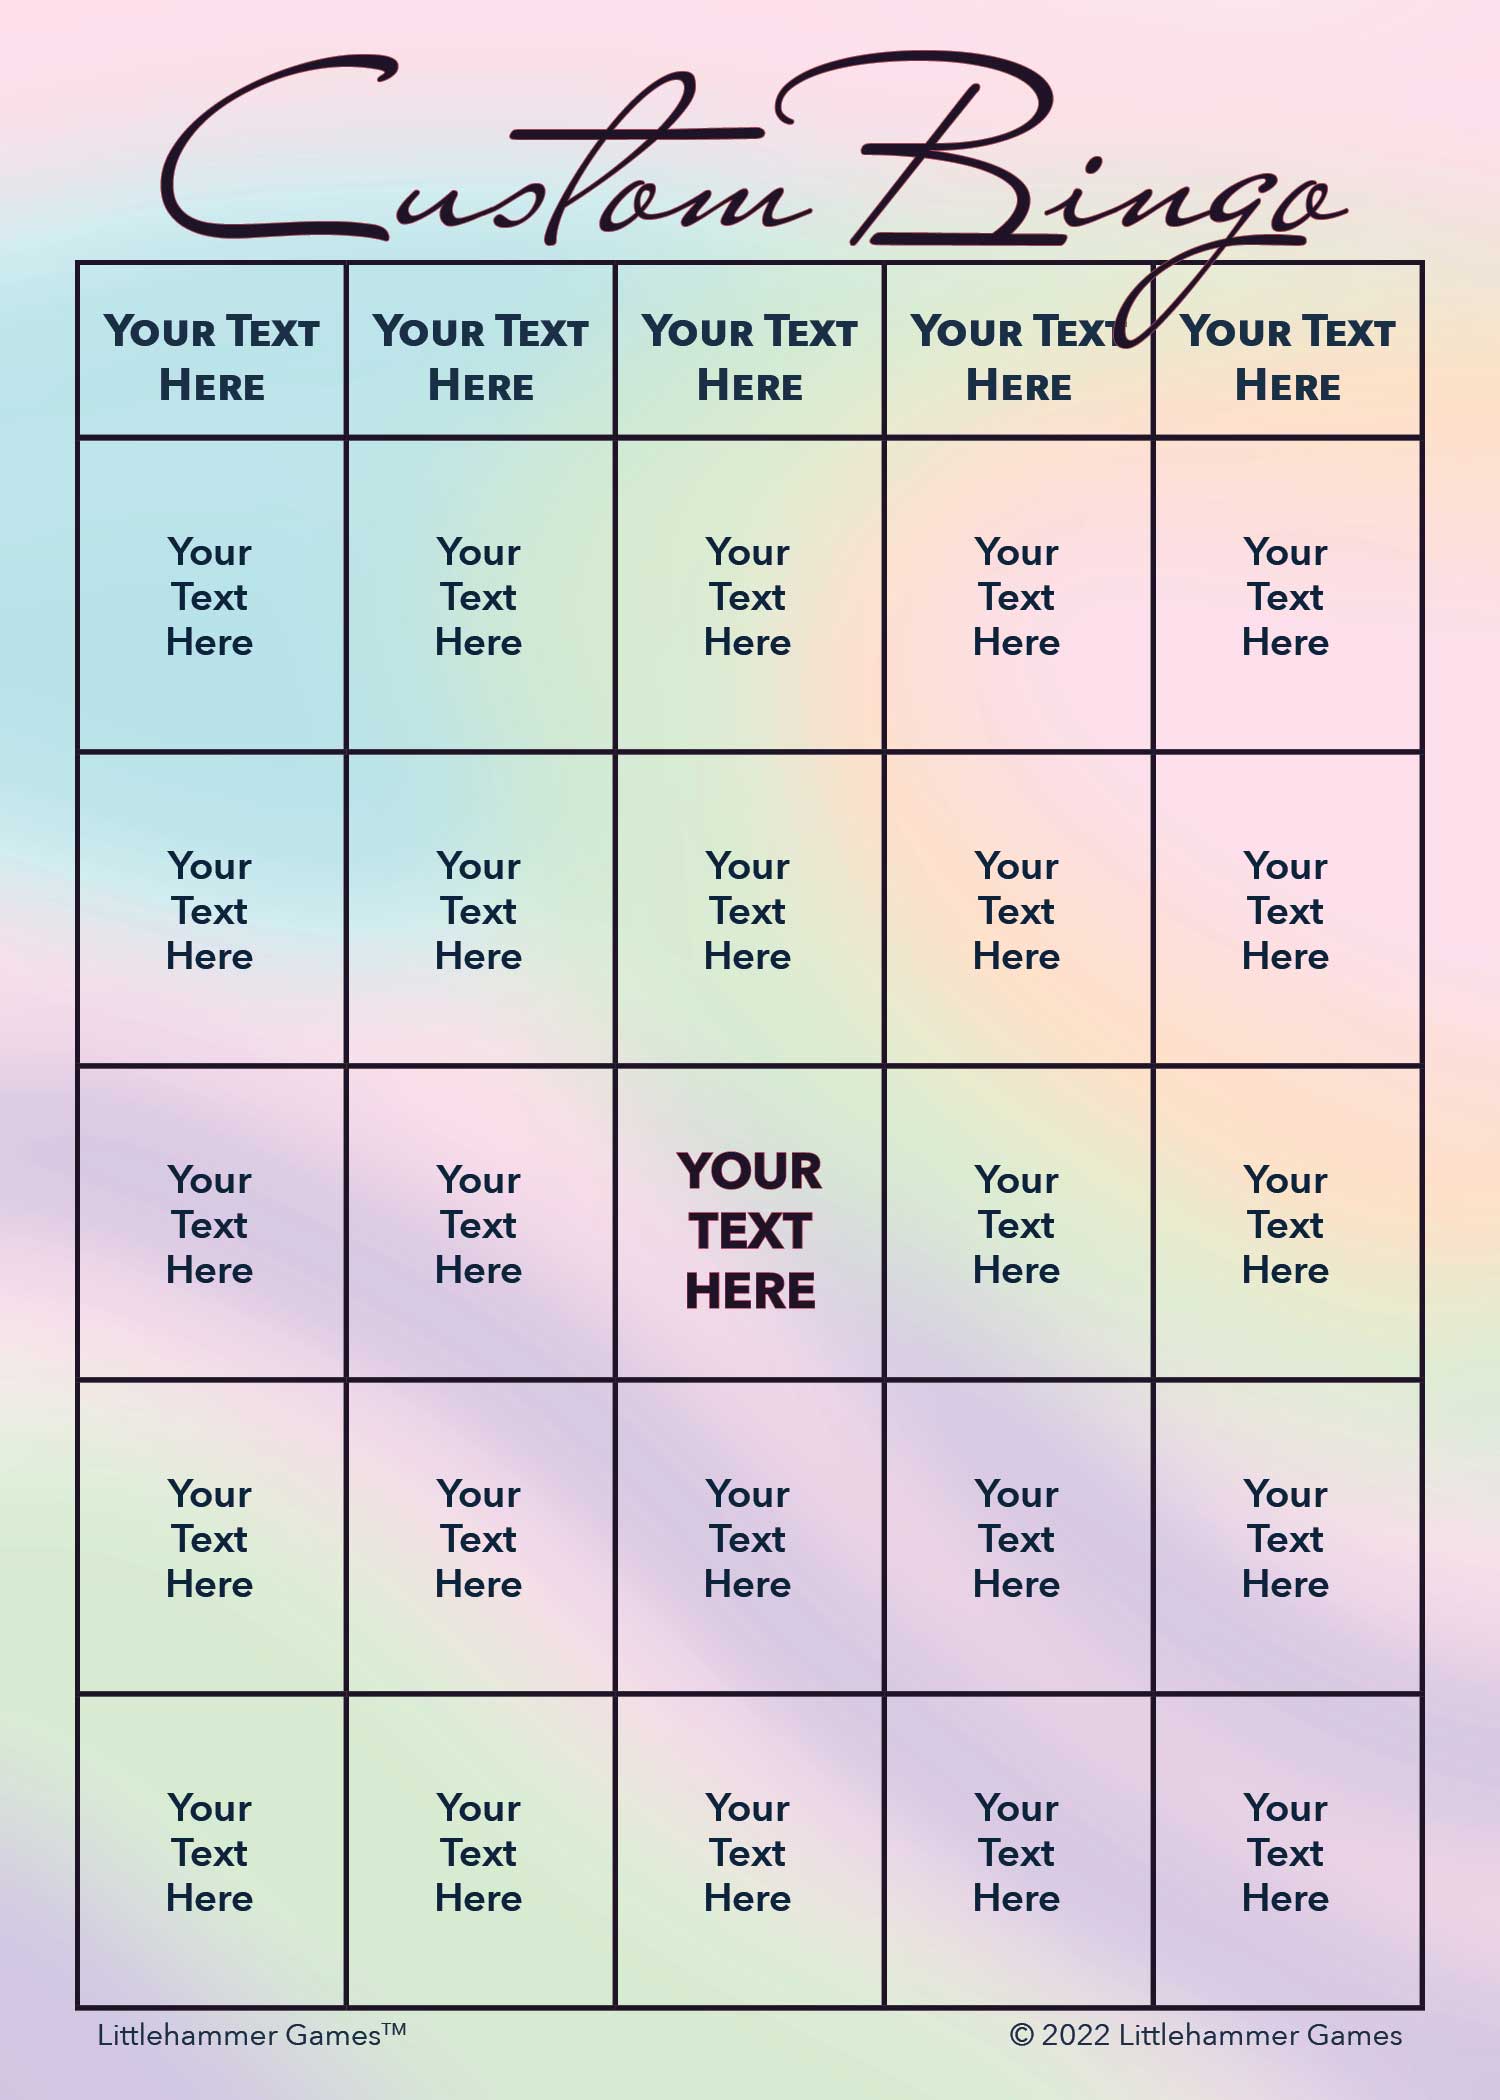 Custom Bingo game card with an iridescent holographic background